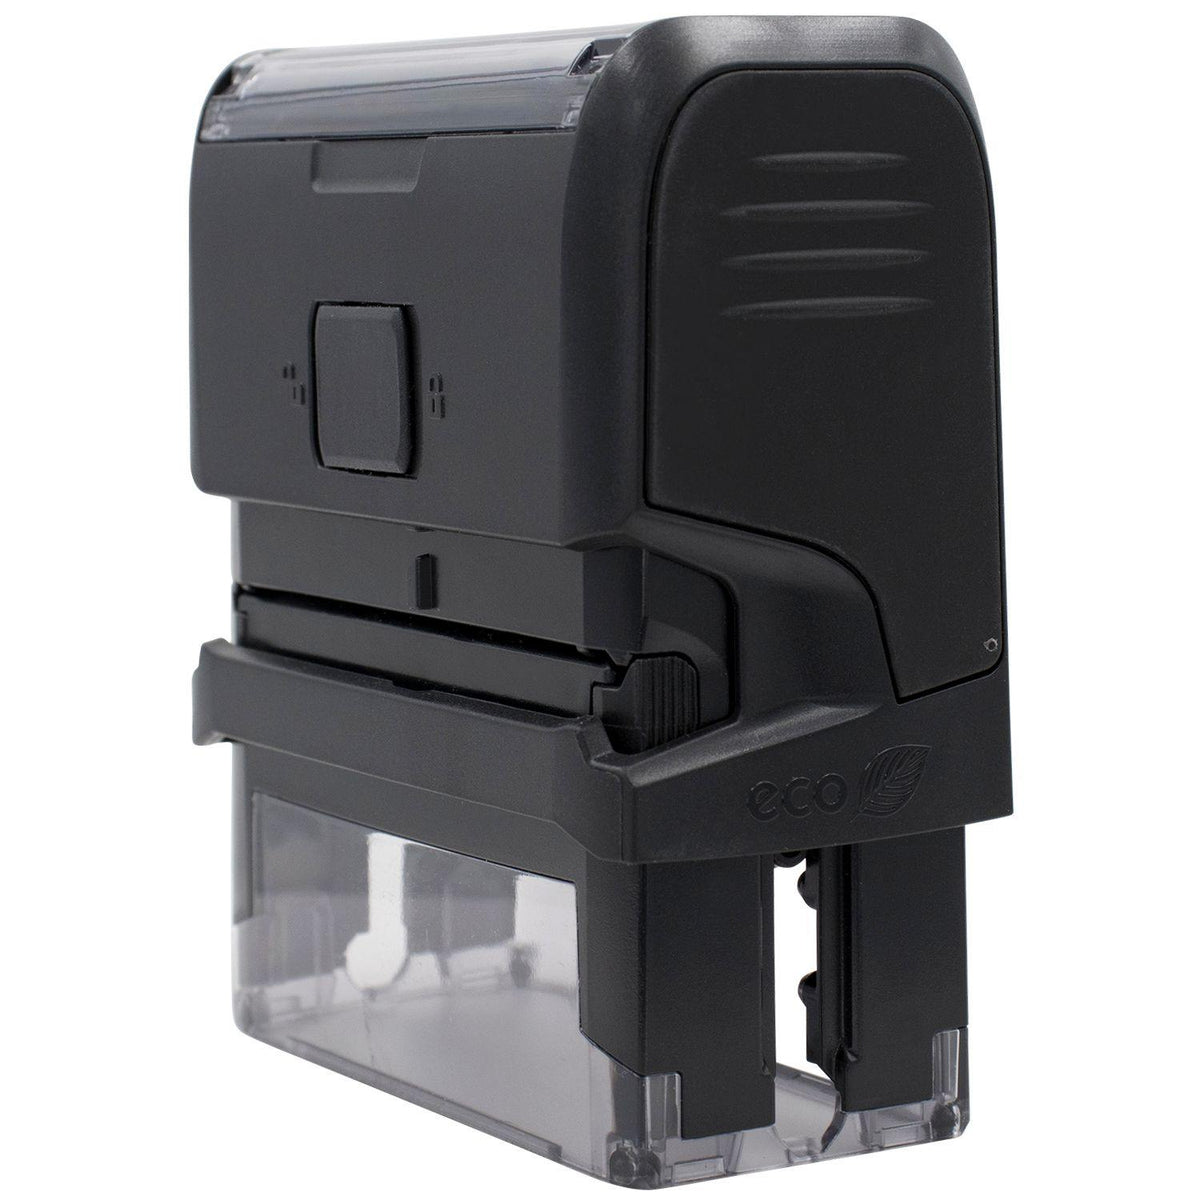 Self Inking Disclosures Stamp - Engineer Seal Stamps - Brand_Trodat, Impression Size_Small, Stamp Type_Self-Inking Stamp, Type of Use_Legal